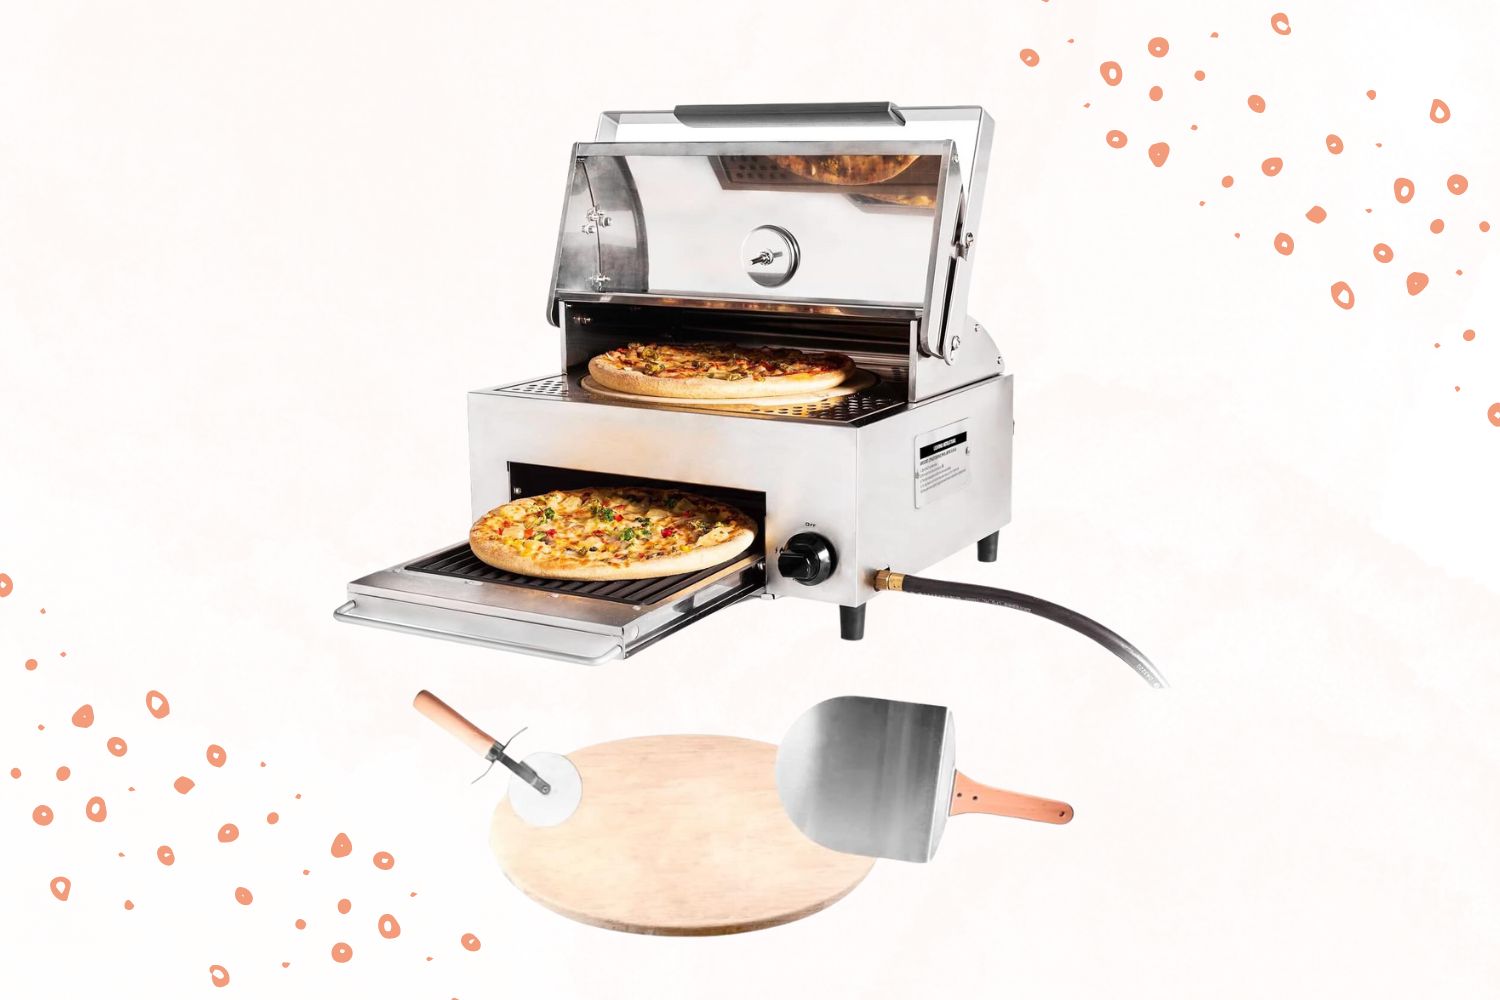 CAPT'N COOK OvenPlus Portable Gas Pizza Oven